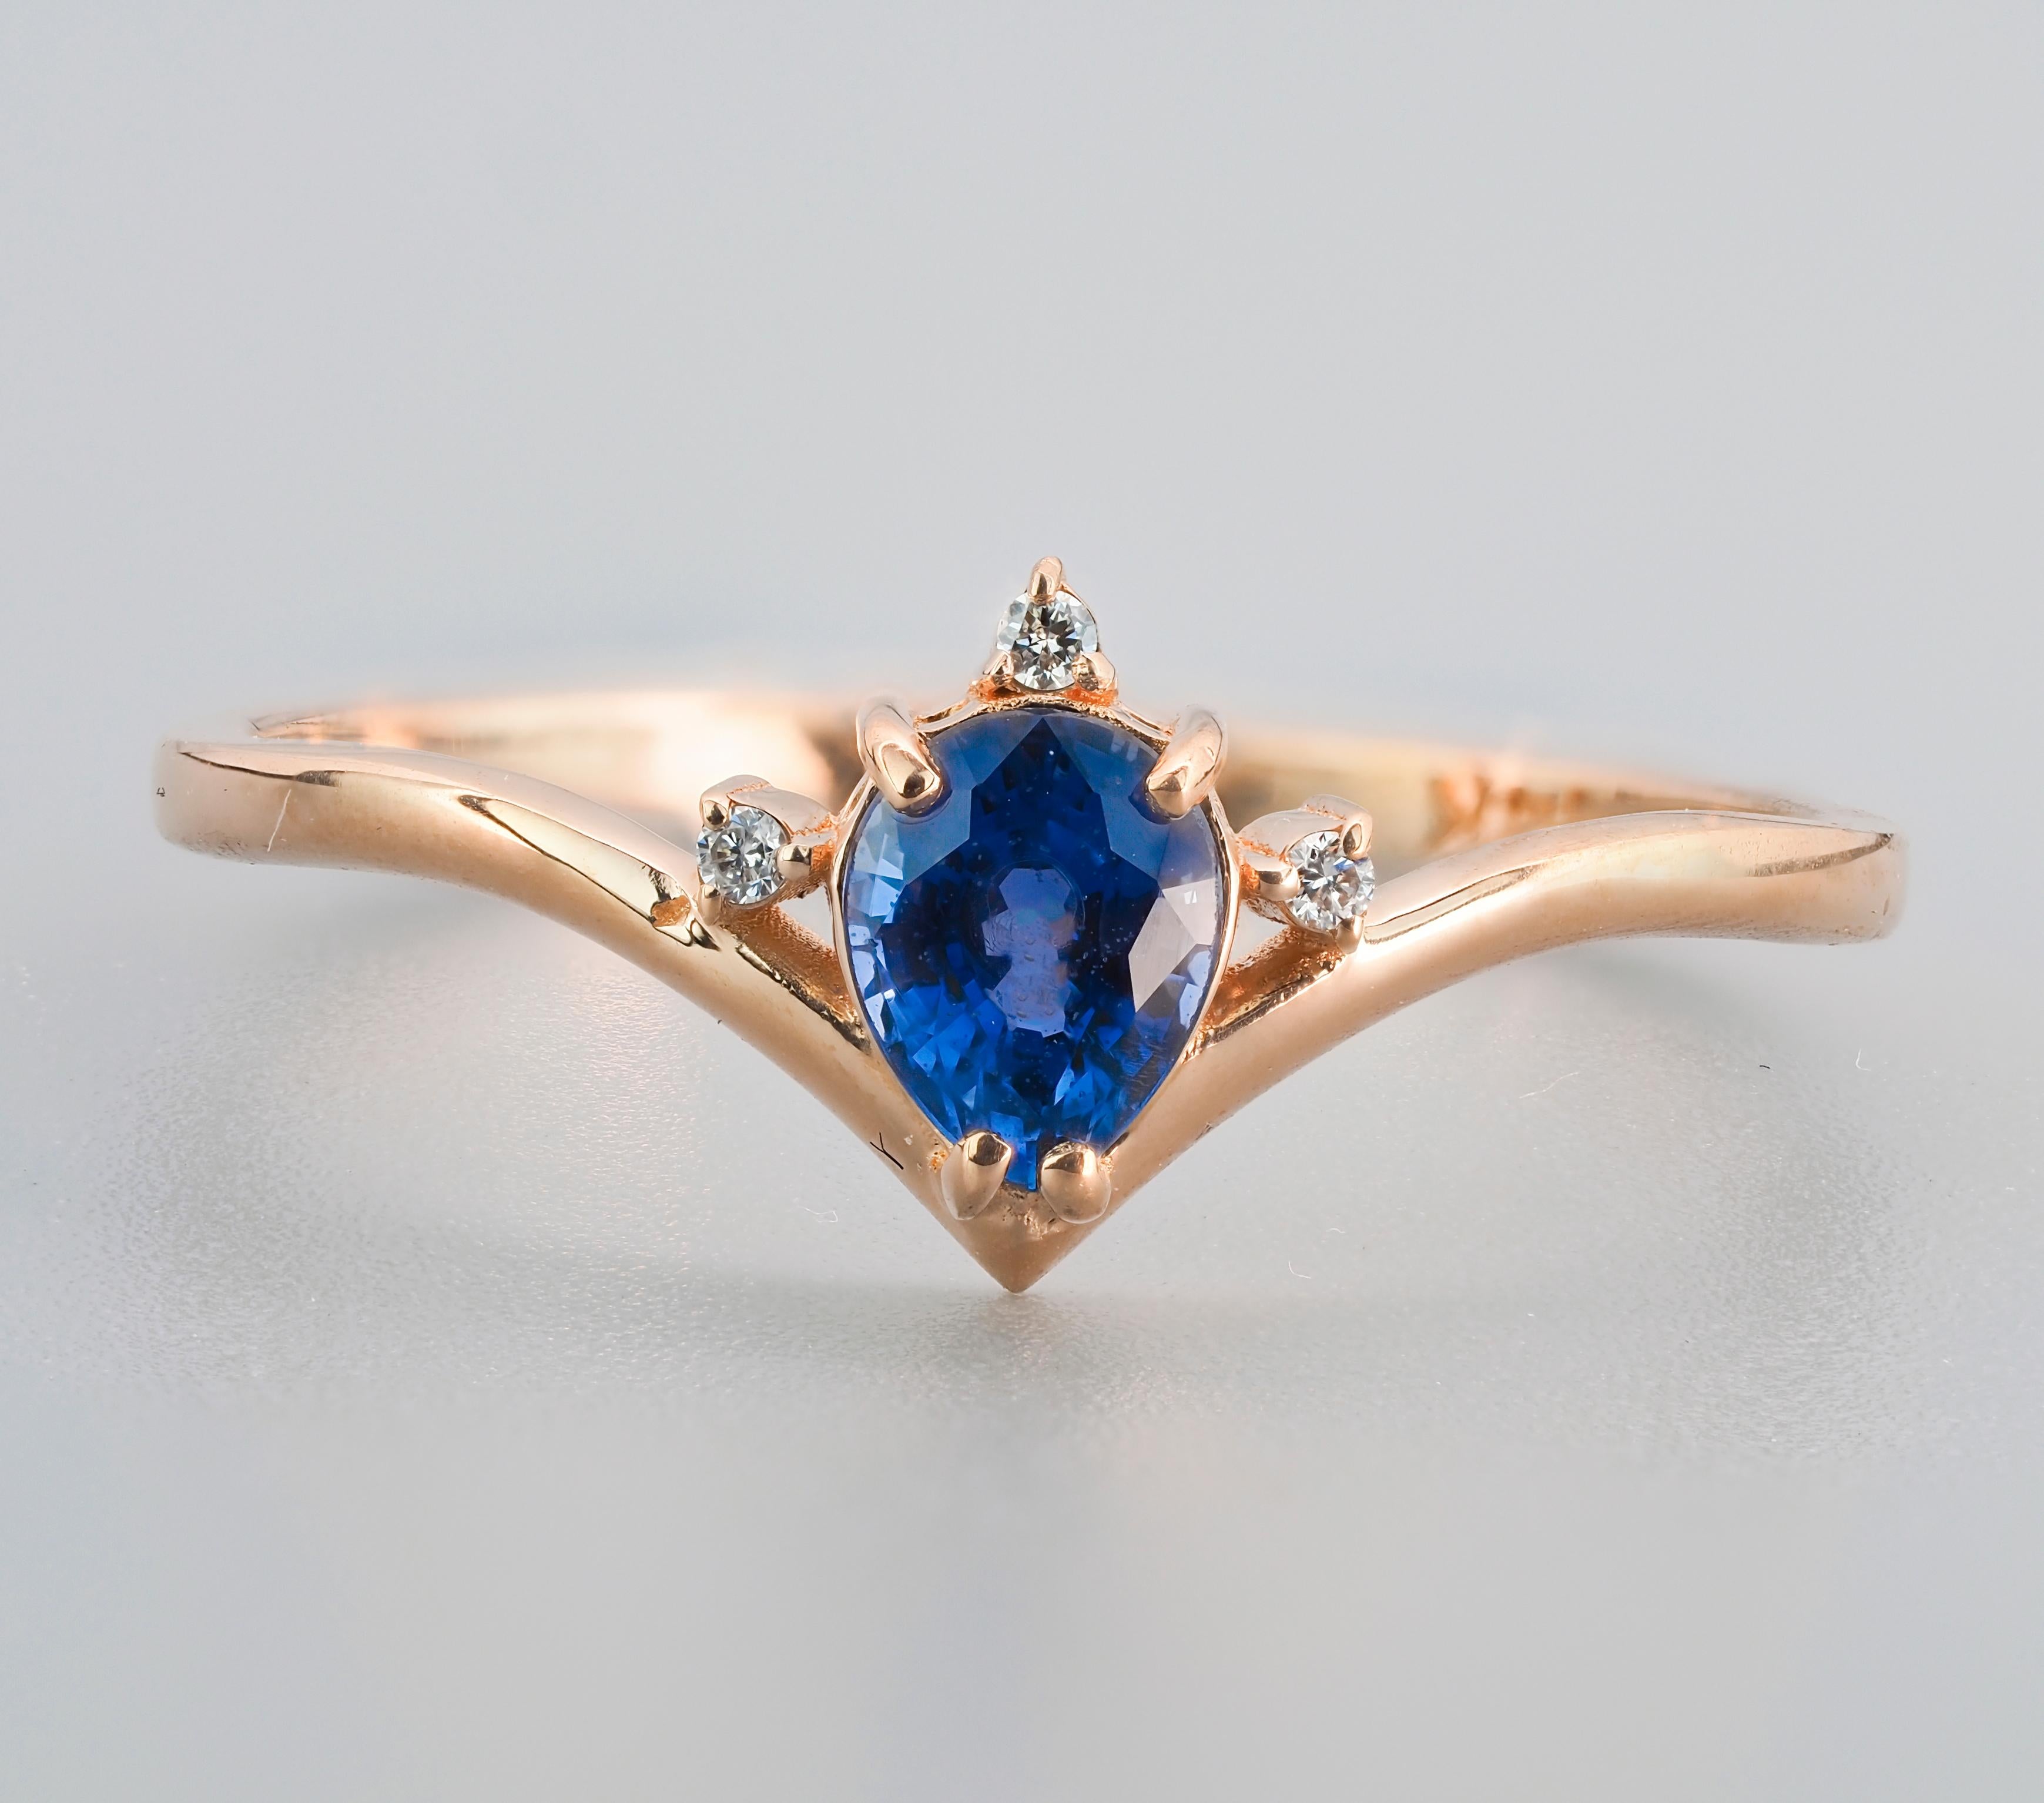 Pear sapphire 14k gold ring. 
Minimalist sapphire ring. 0.50 ct sapphire ring. Blue sapphire ring. September birthstone ring.

Metal: 14k gold
Weight: 1.5 g. depends from size.

Set with sapphire and diamonds.
Pear shape, approx 0.45 ct, blue